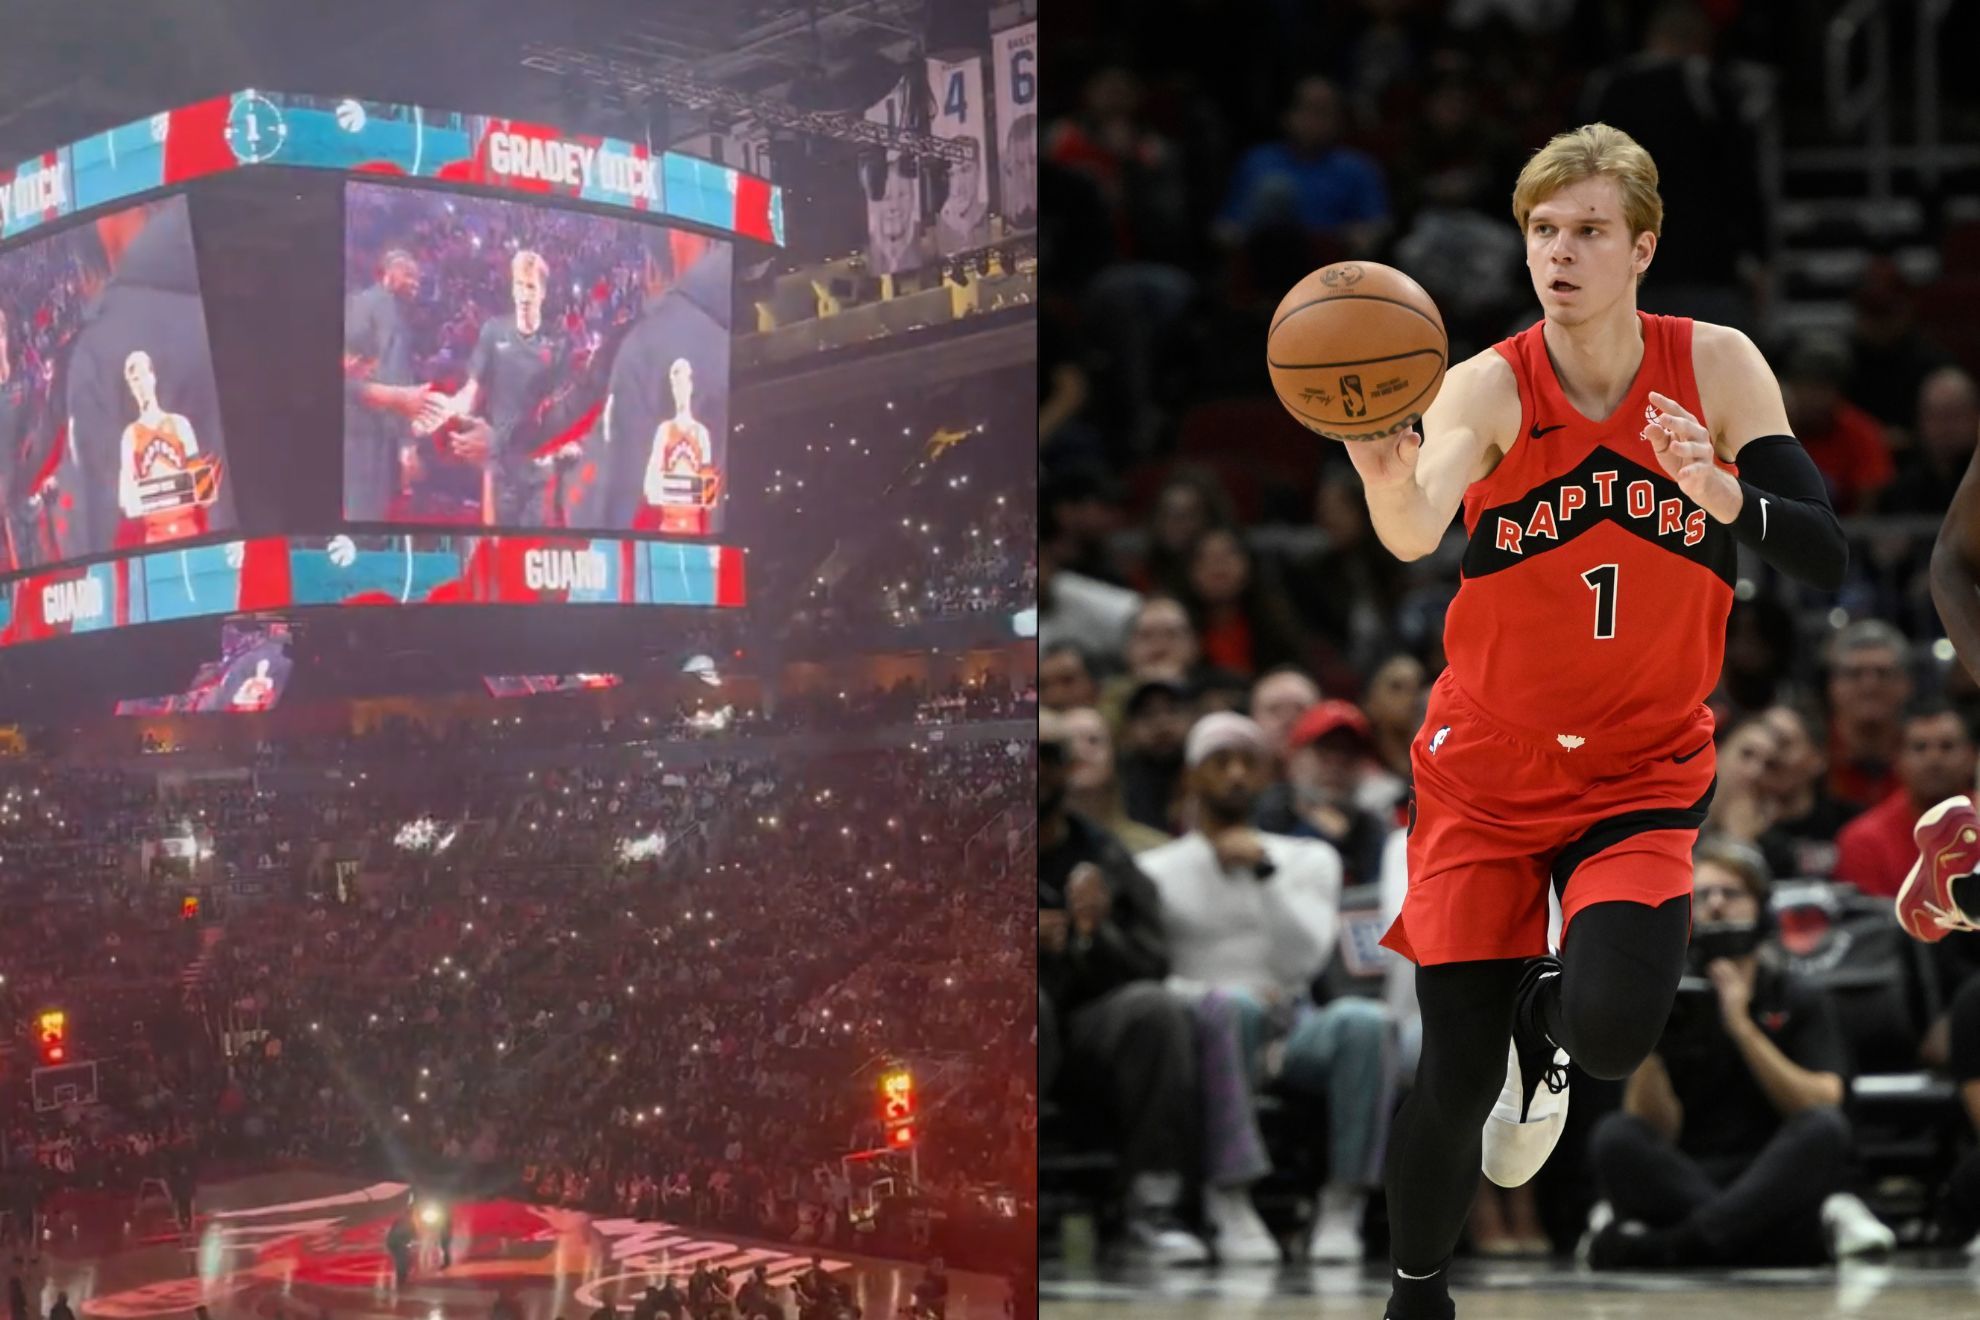 Gradey Dick was in the Raptors starting lineup for the first time, against the Bucks.